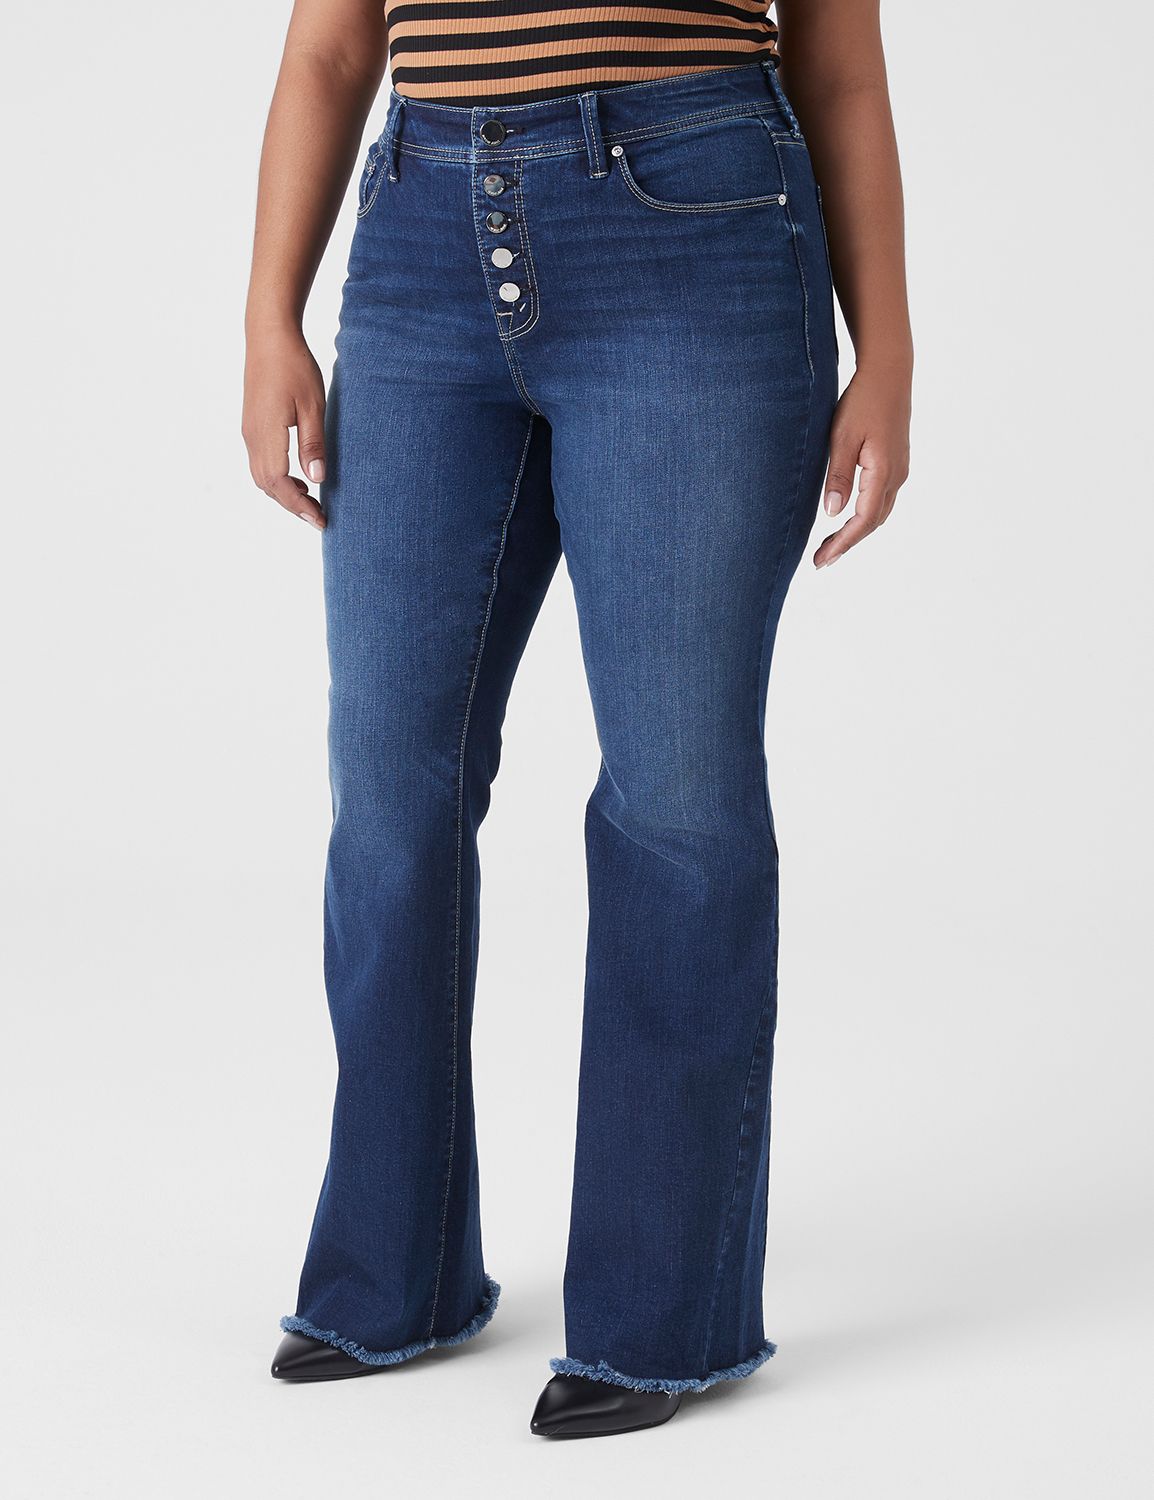 Seven7 Jeans Discounts and Cash Back for Everyone